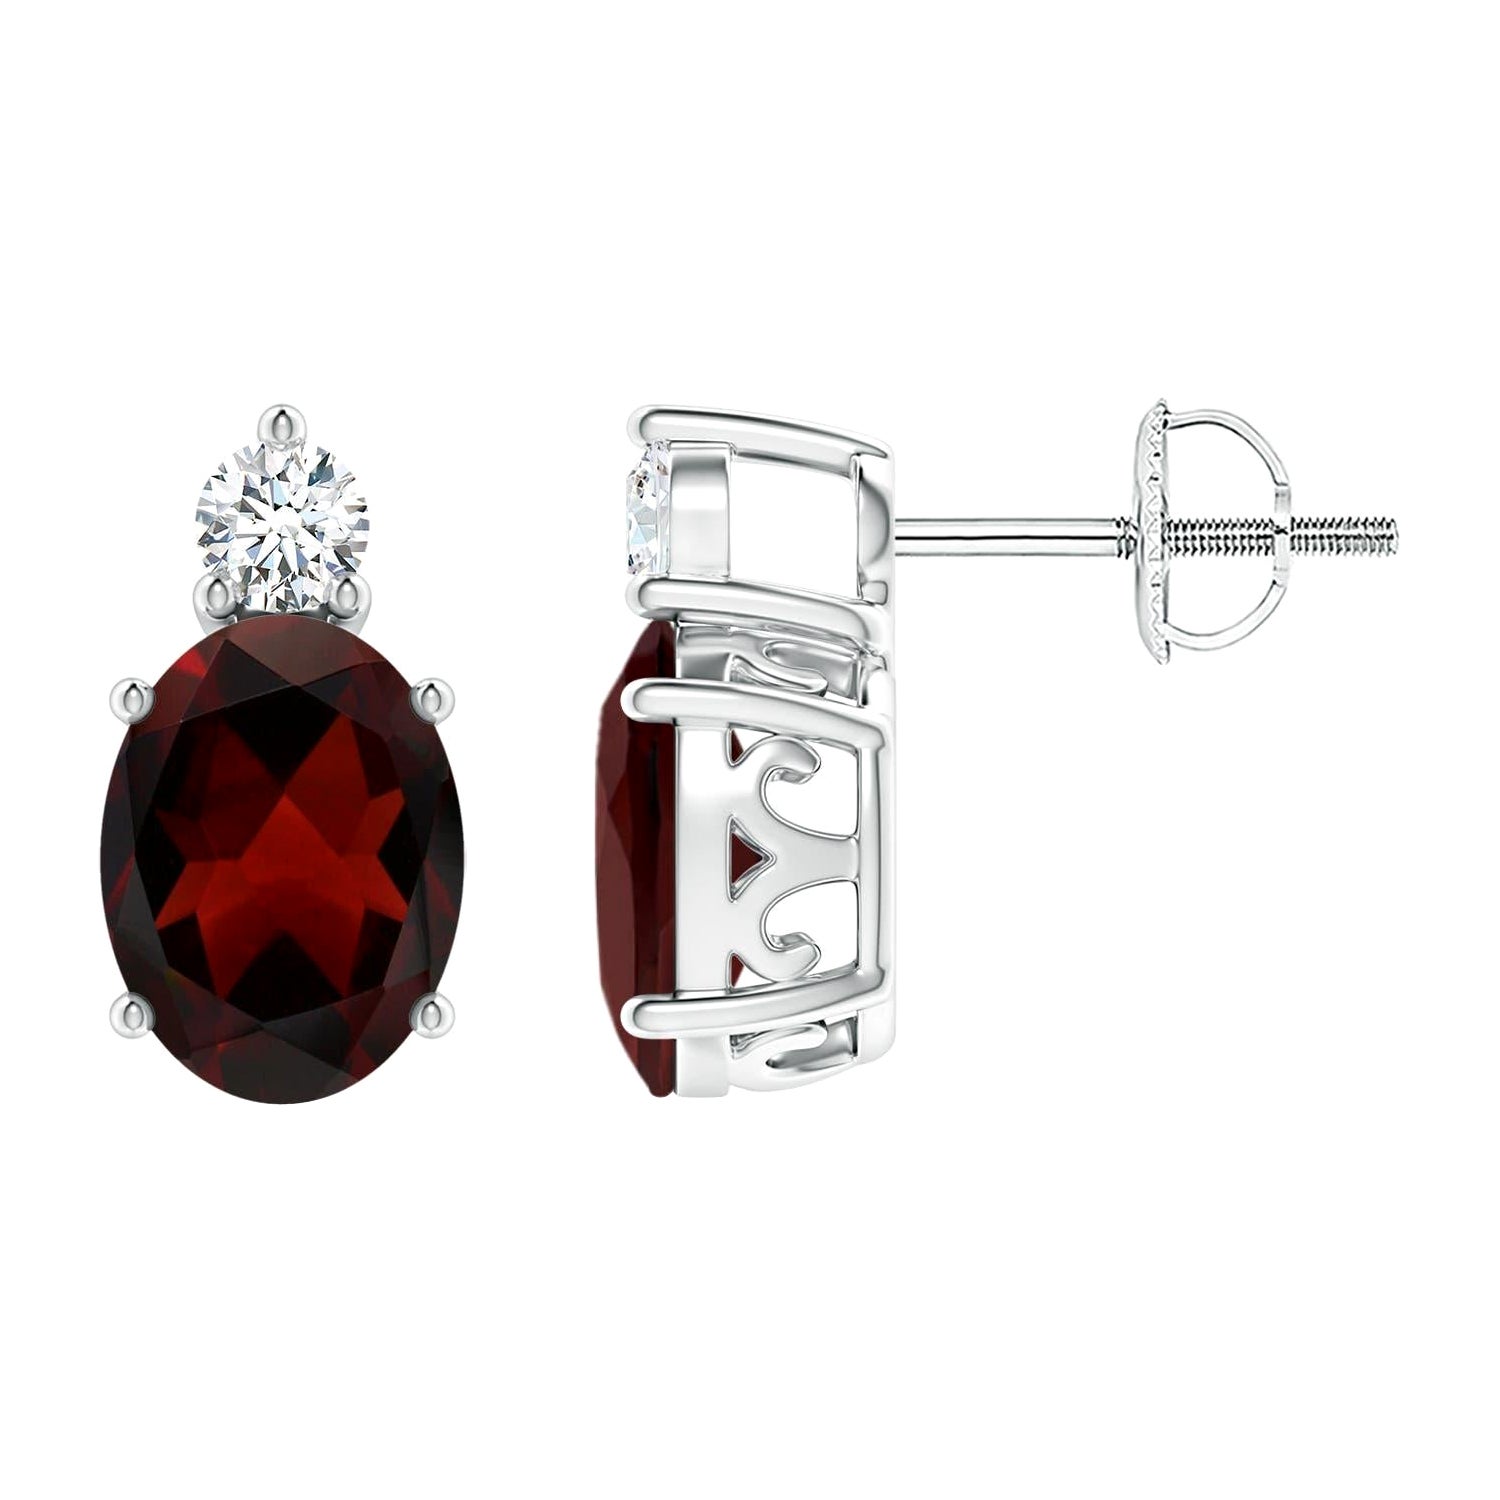 Natural Oval 2.9ct Garnet Stud Earrings with Diamond in Platinum